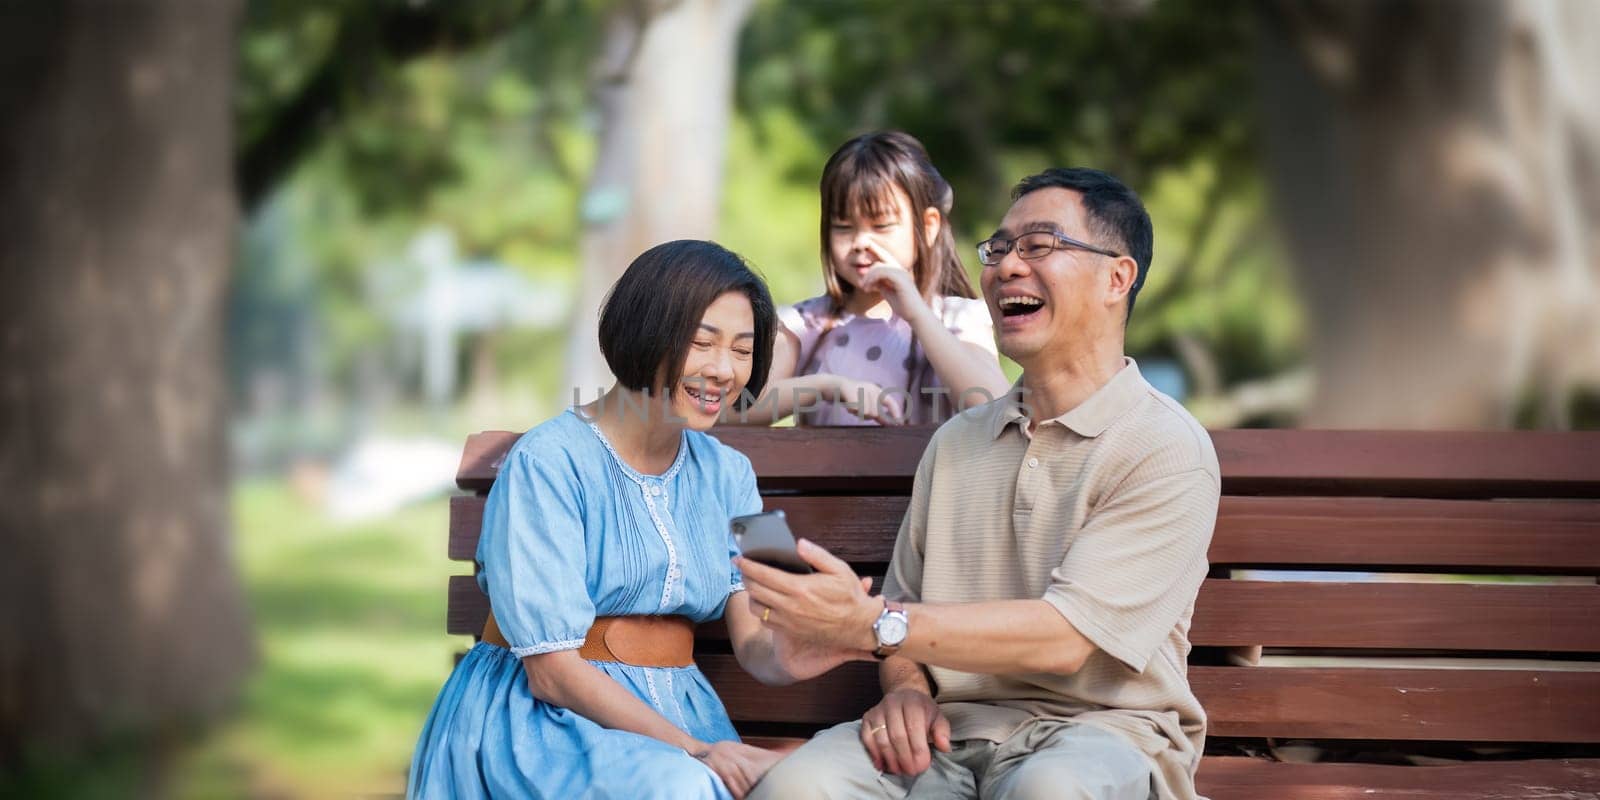 Grandparent playing togetherness with a granddaughter in the park in the morning. Family, love and grandchild bonding with grandfather and grandma in a park. concept child and senior.